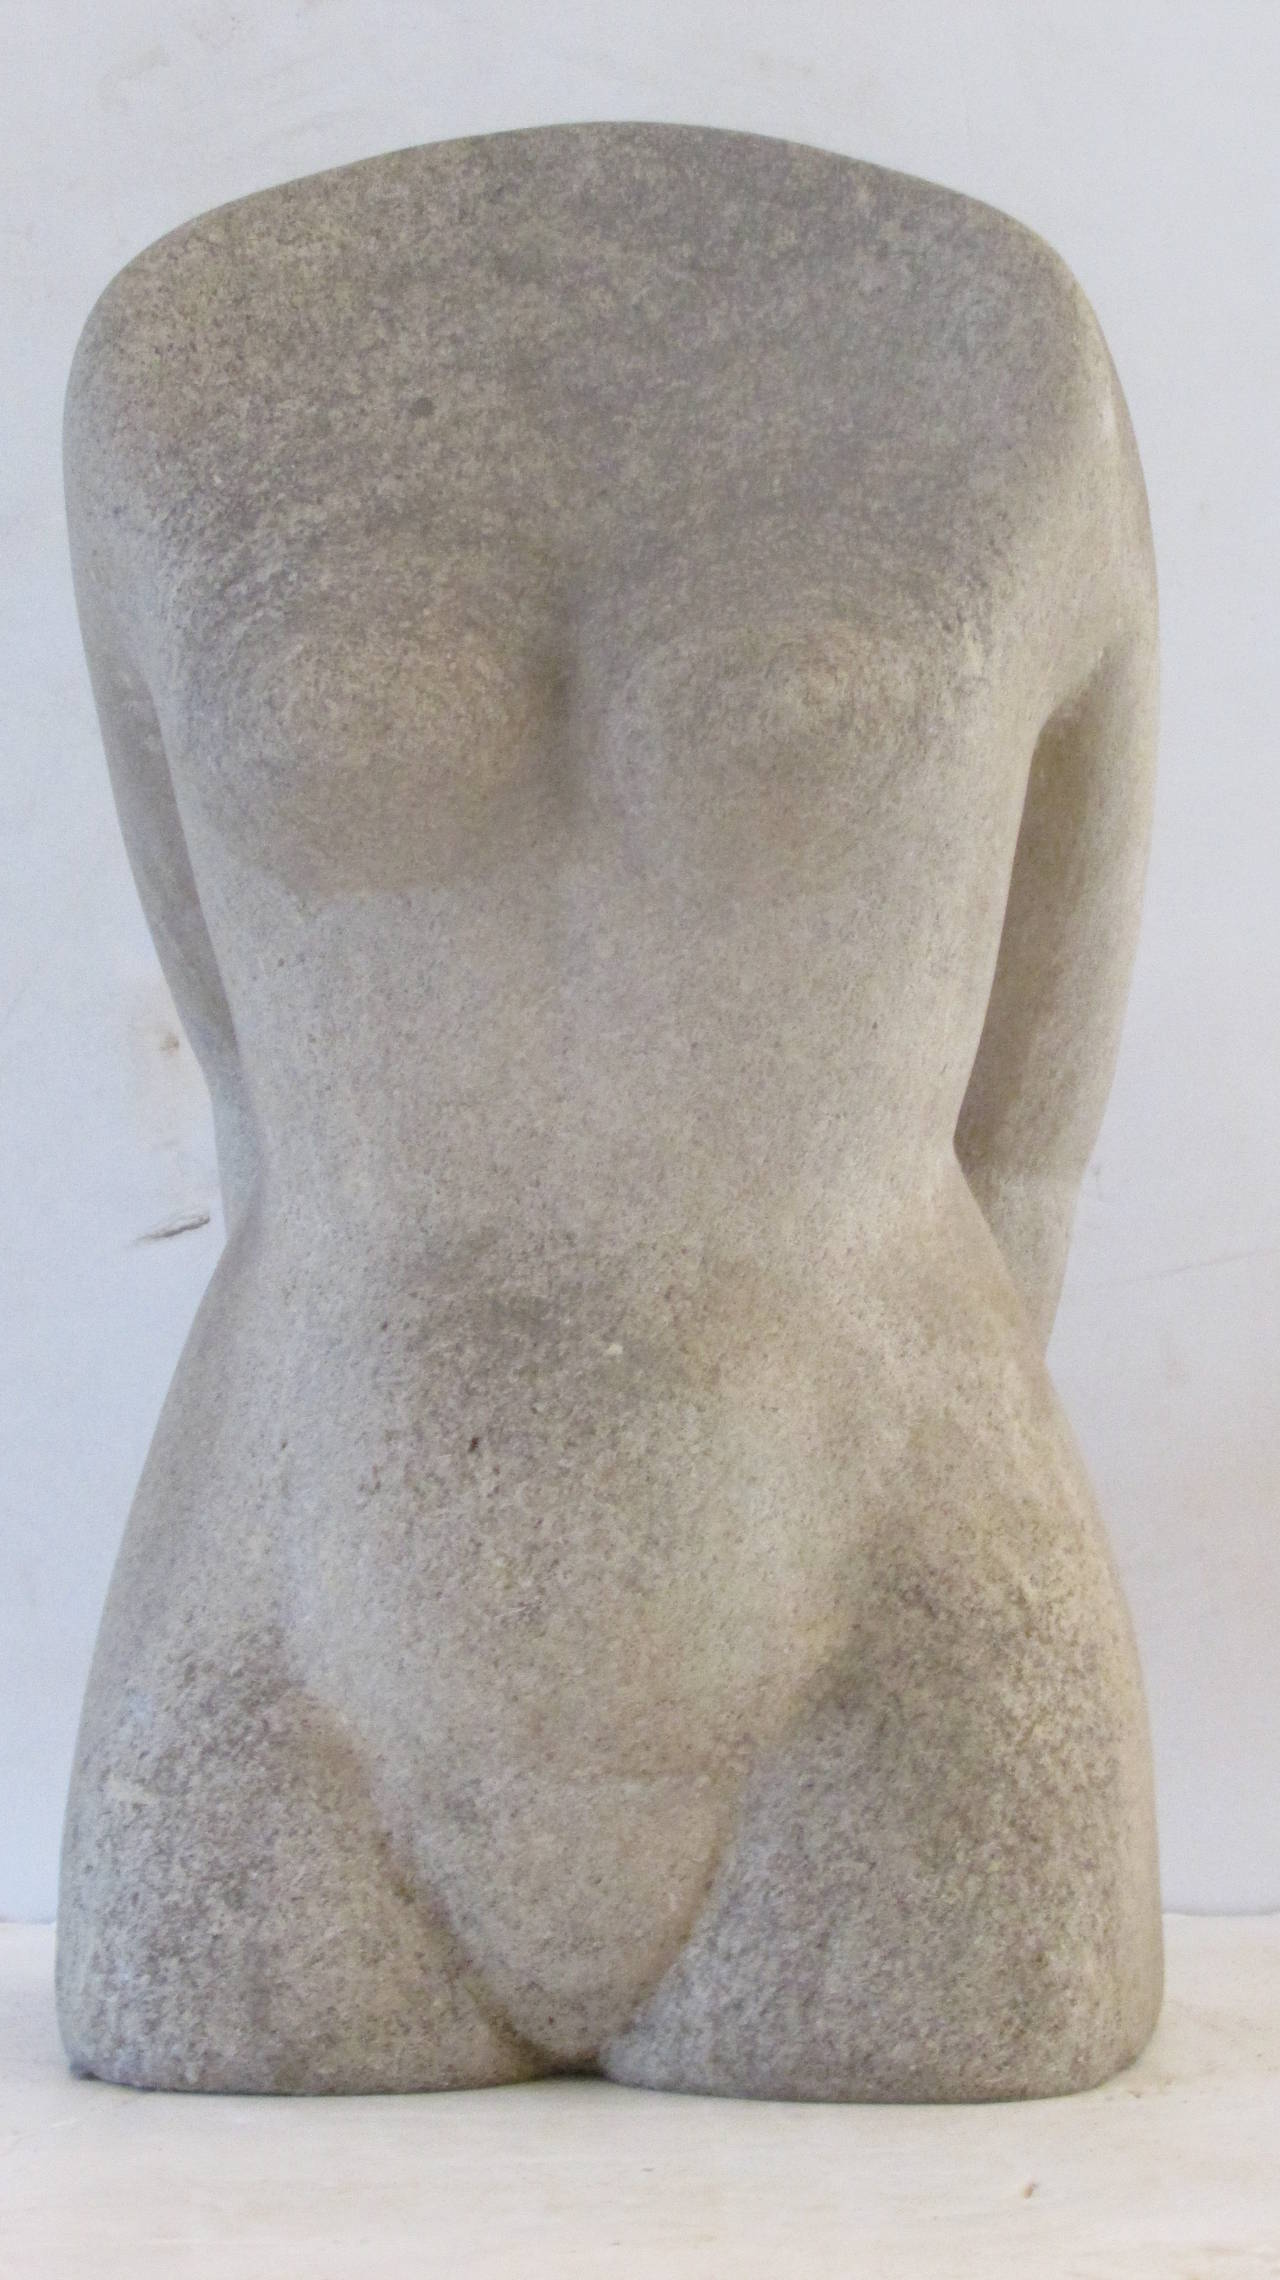 A carved stone female nude torso sculpture in a striking modernist pose that looks great from all angles. Beautiful aged surface color. Artist signed on underside but cannot make out. Found many years ago in Western NY State, circa 1940s.